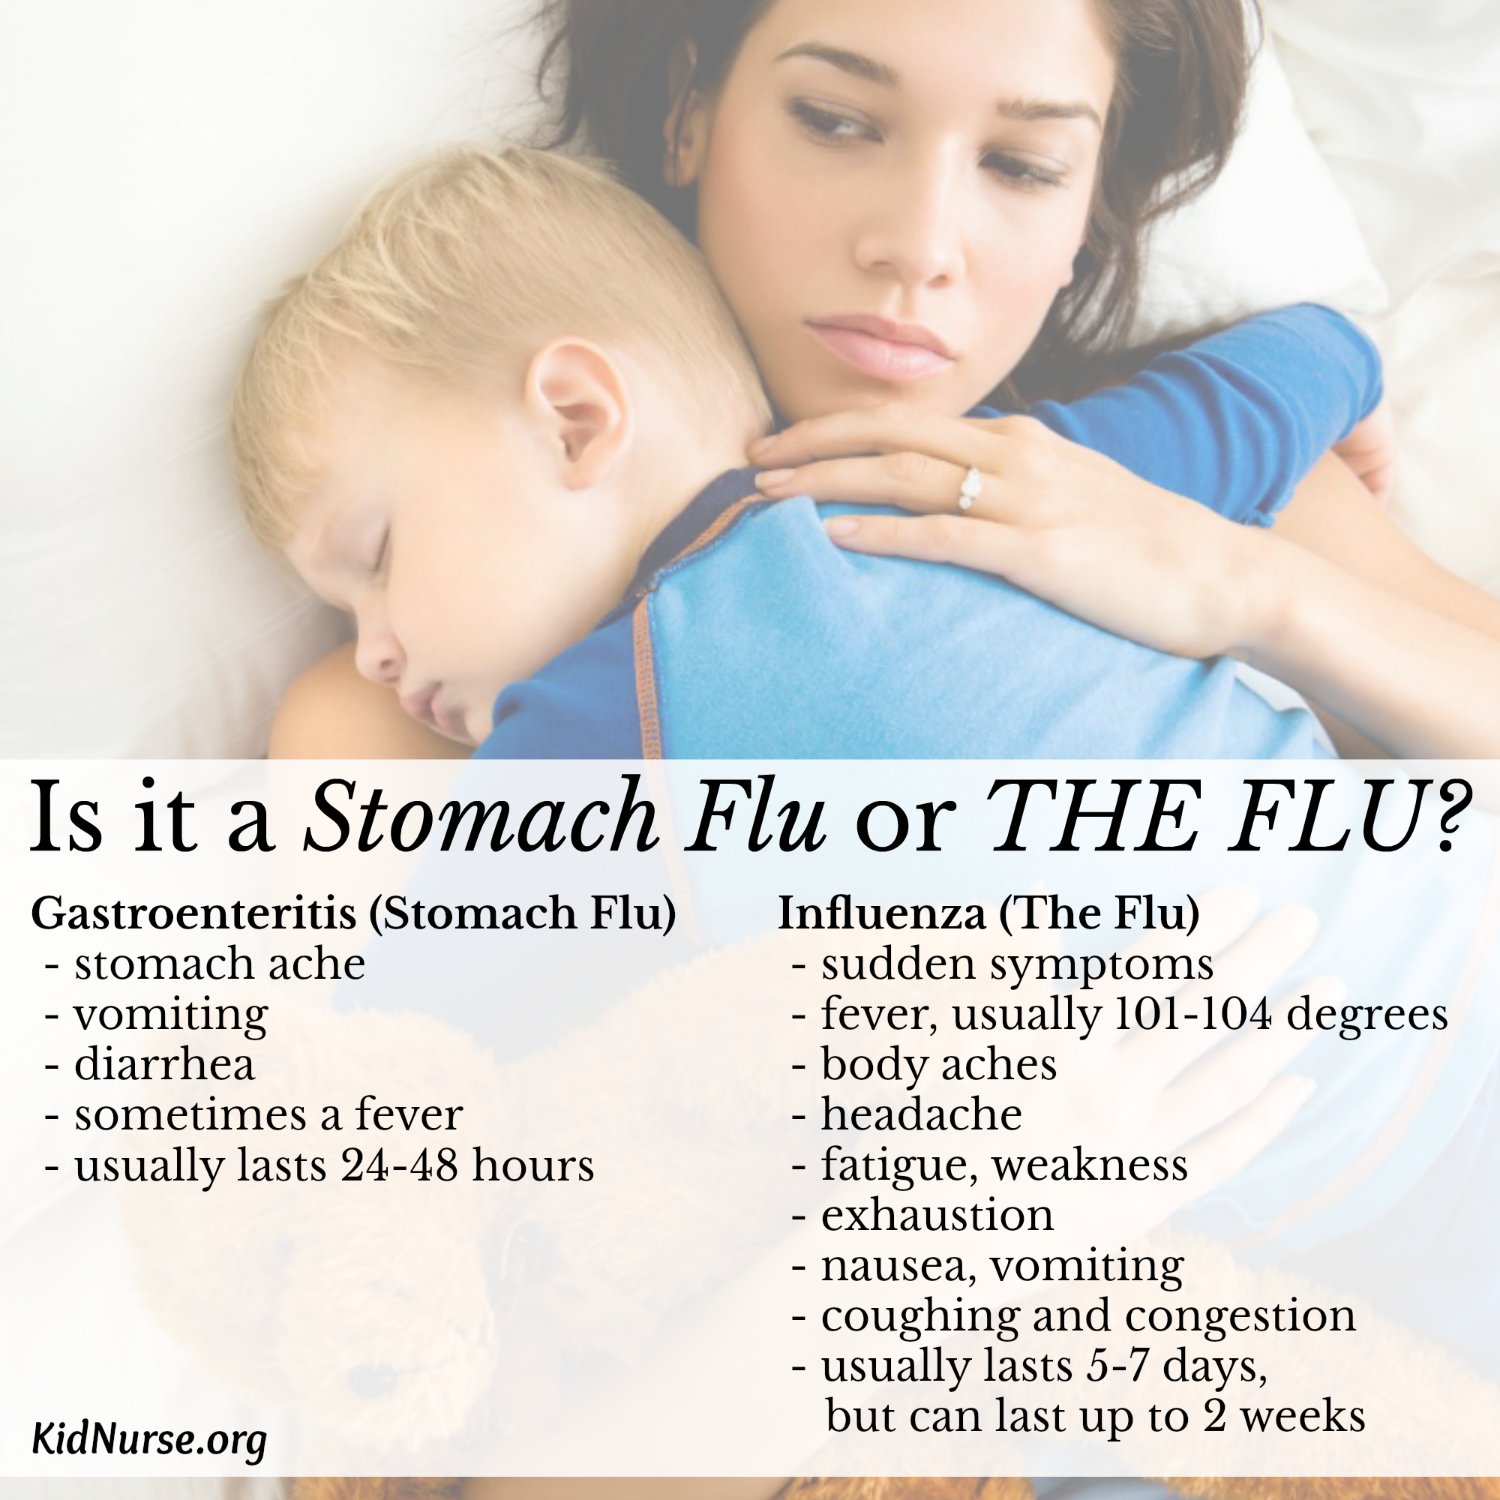 Is it a Stomach Flu or THE FLU?